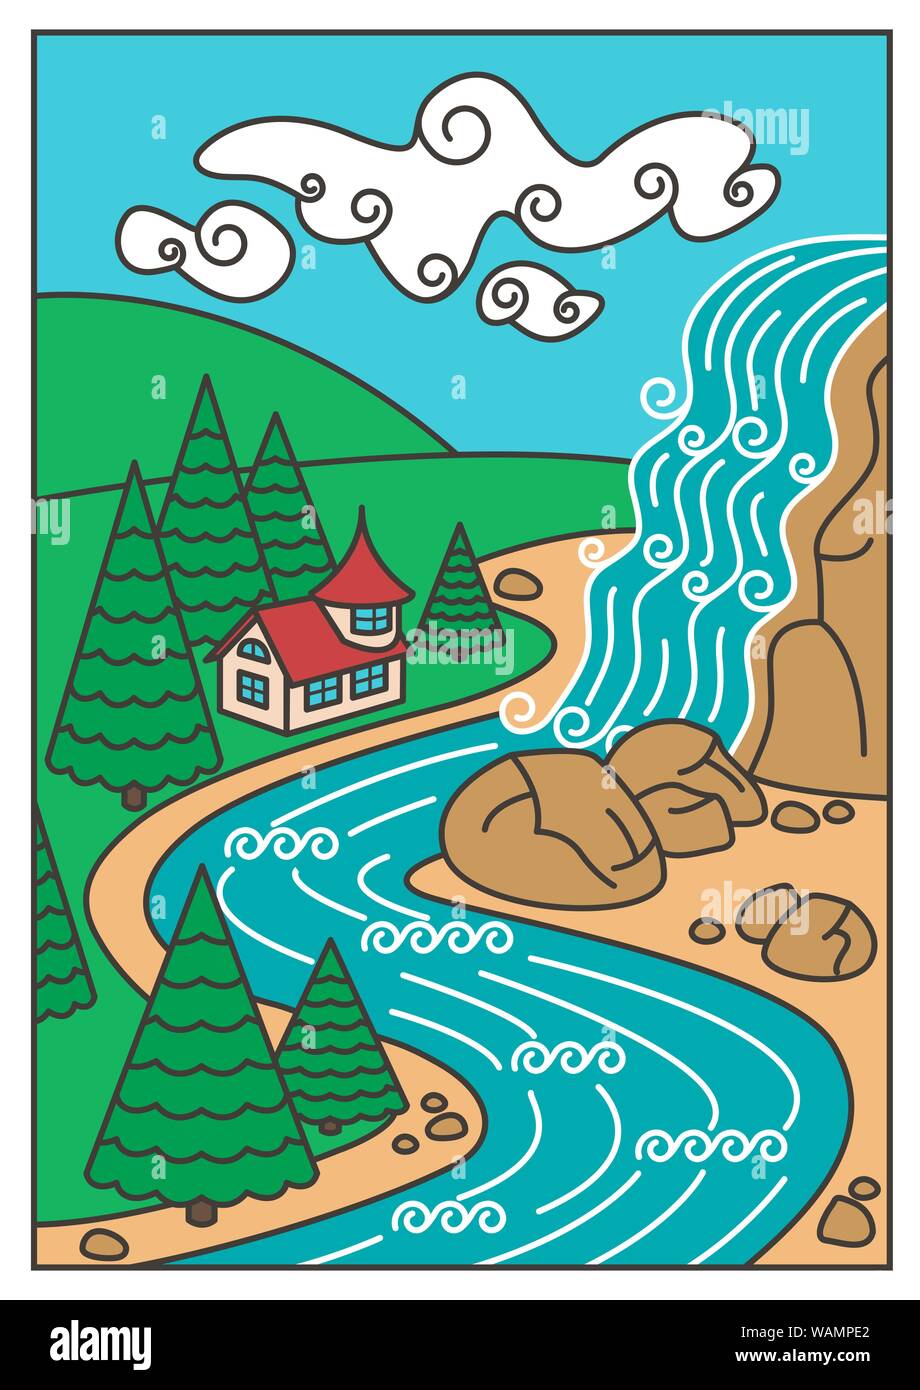 Illustration of Nature Landscape - Waterfall, River, Mountains and the beautiful house. Vector Card Stock Vector